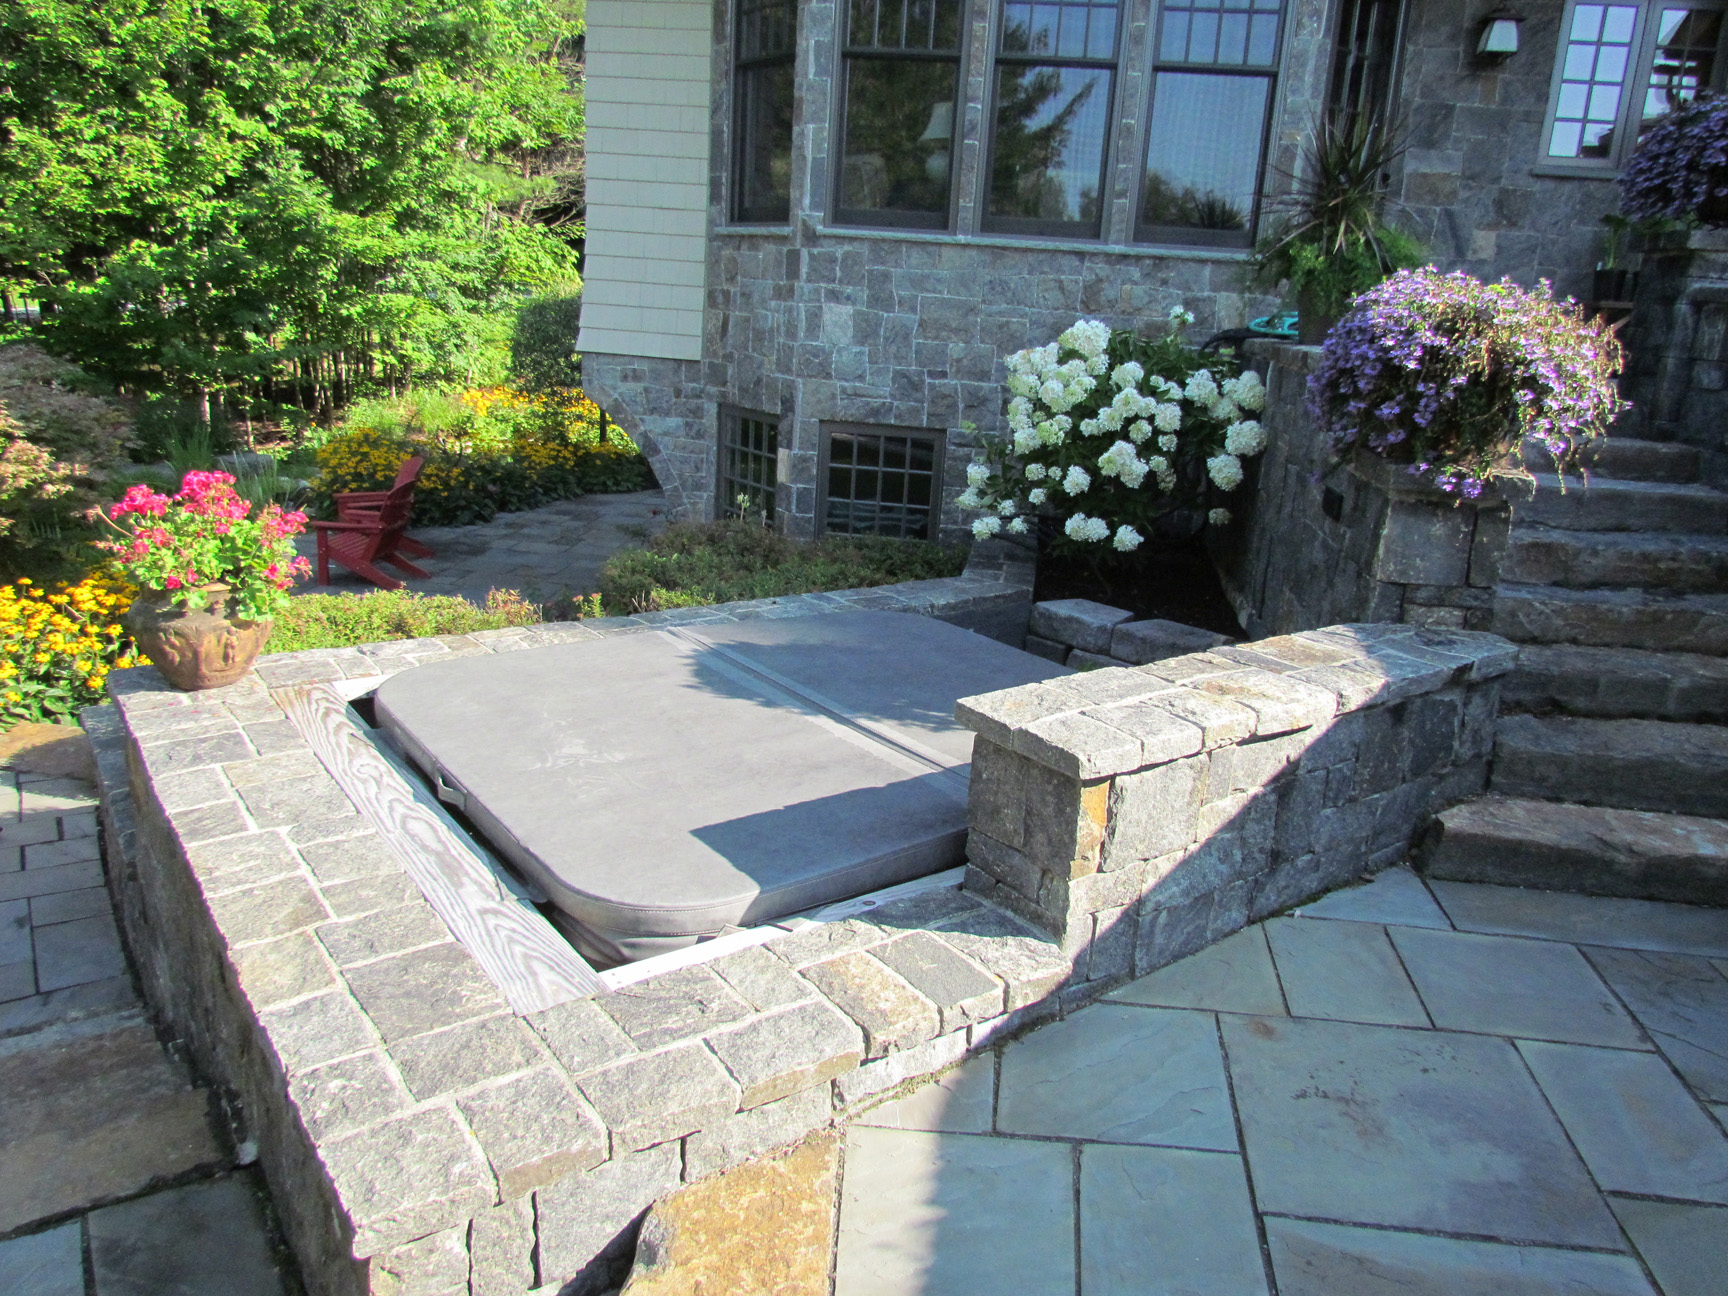 Tucked away hot tub finished with stone surround by Carpenter & Costin